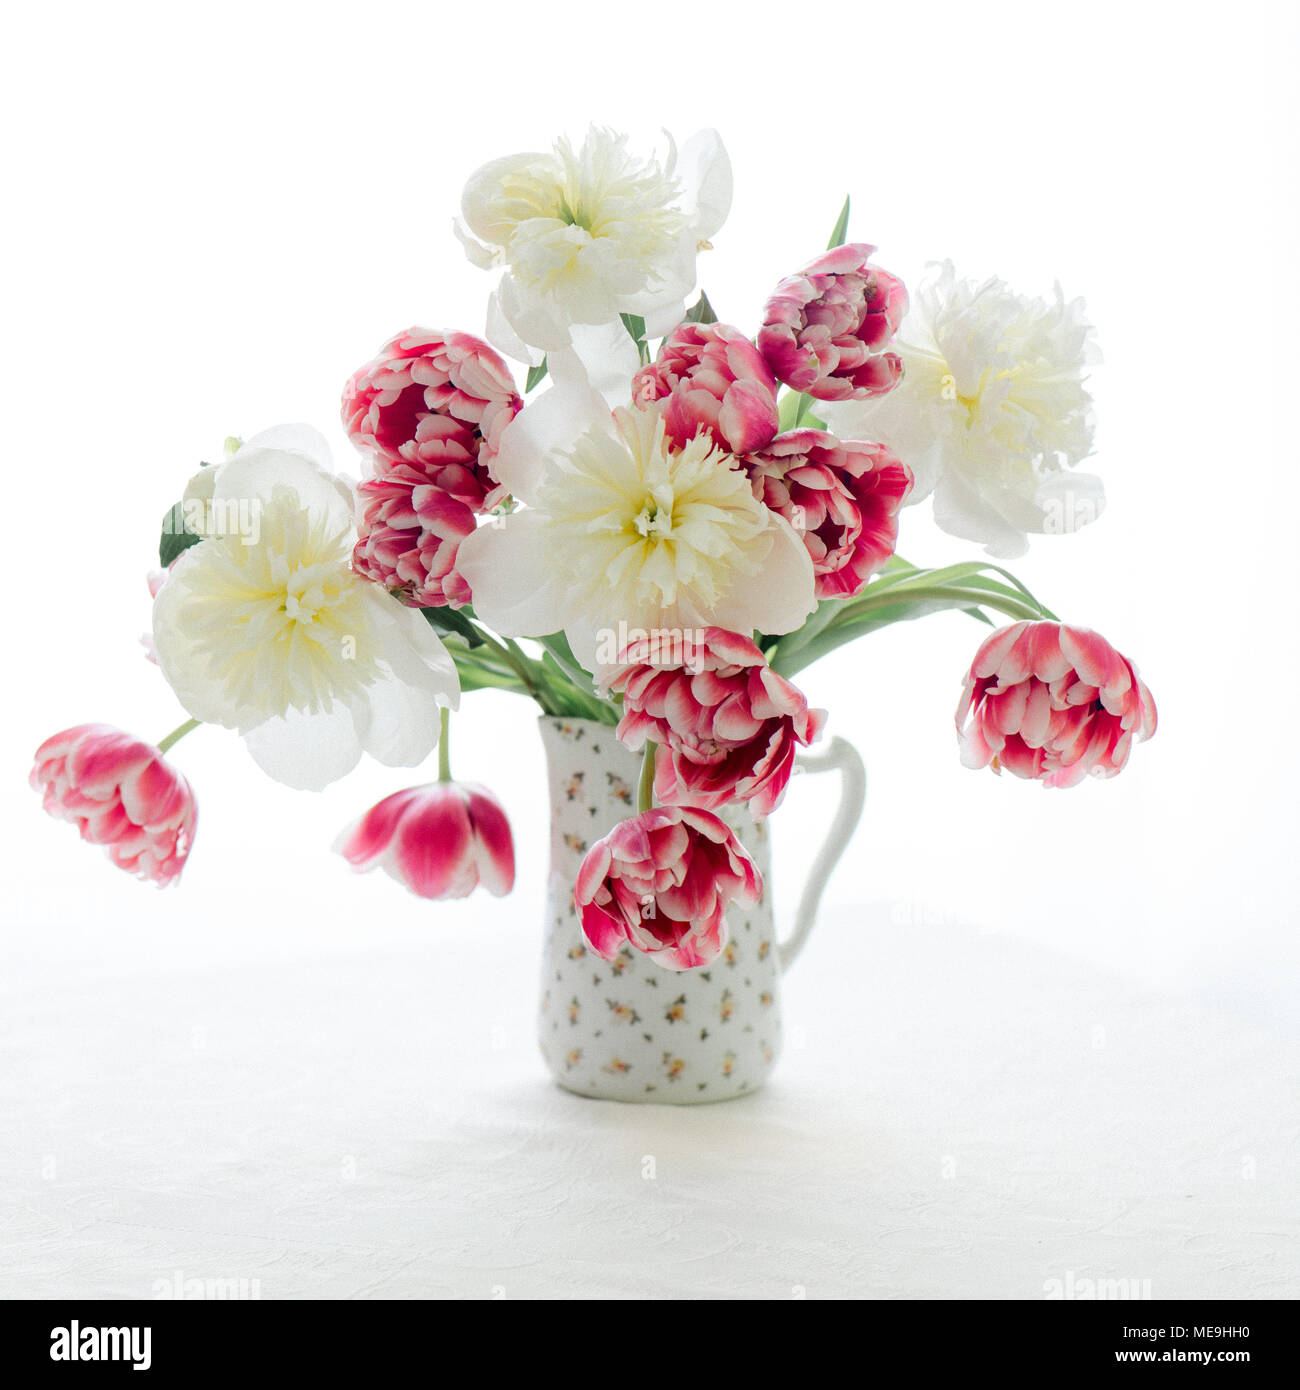 Tulips and Peonies in a pitcher Stock Photo